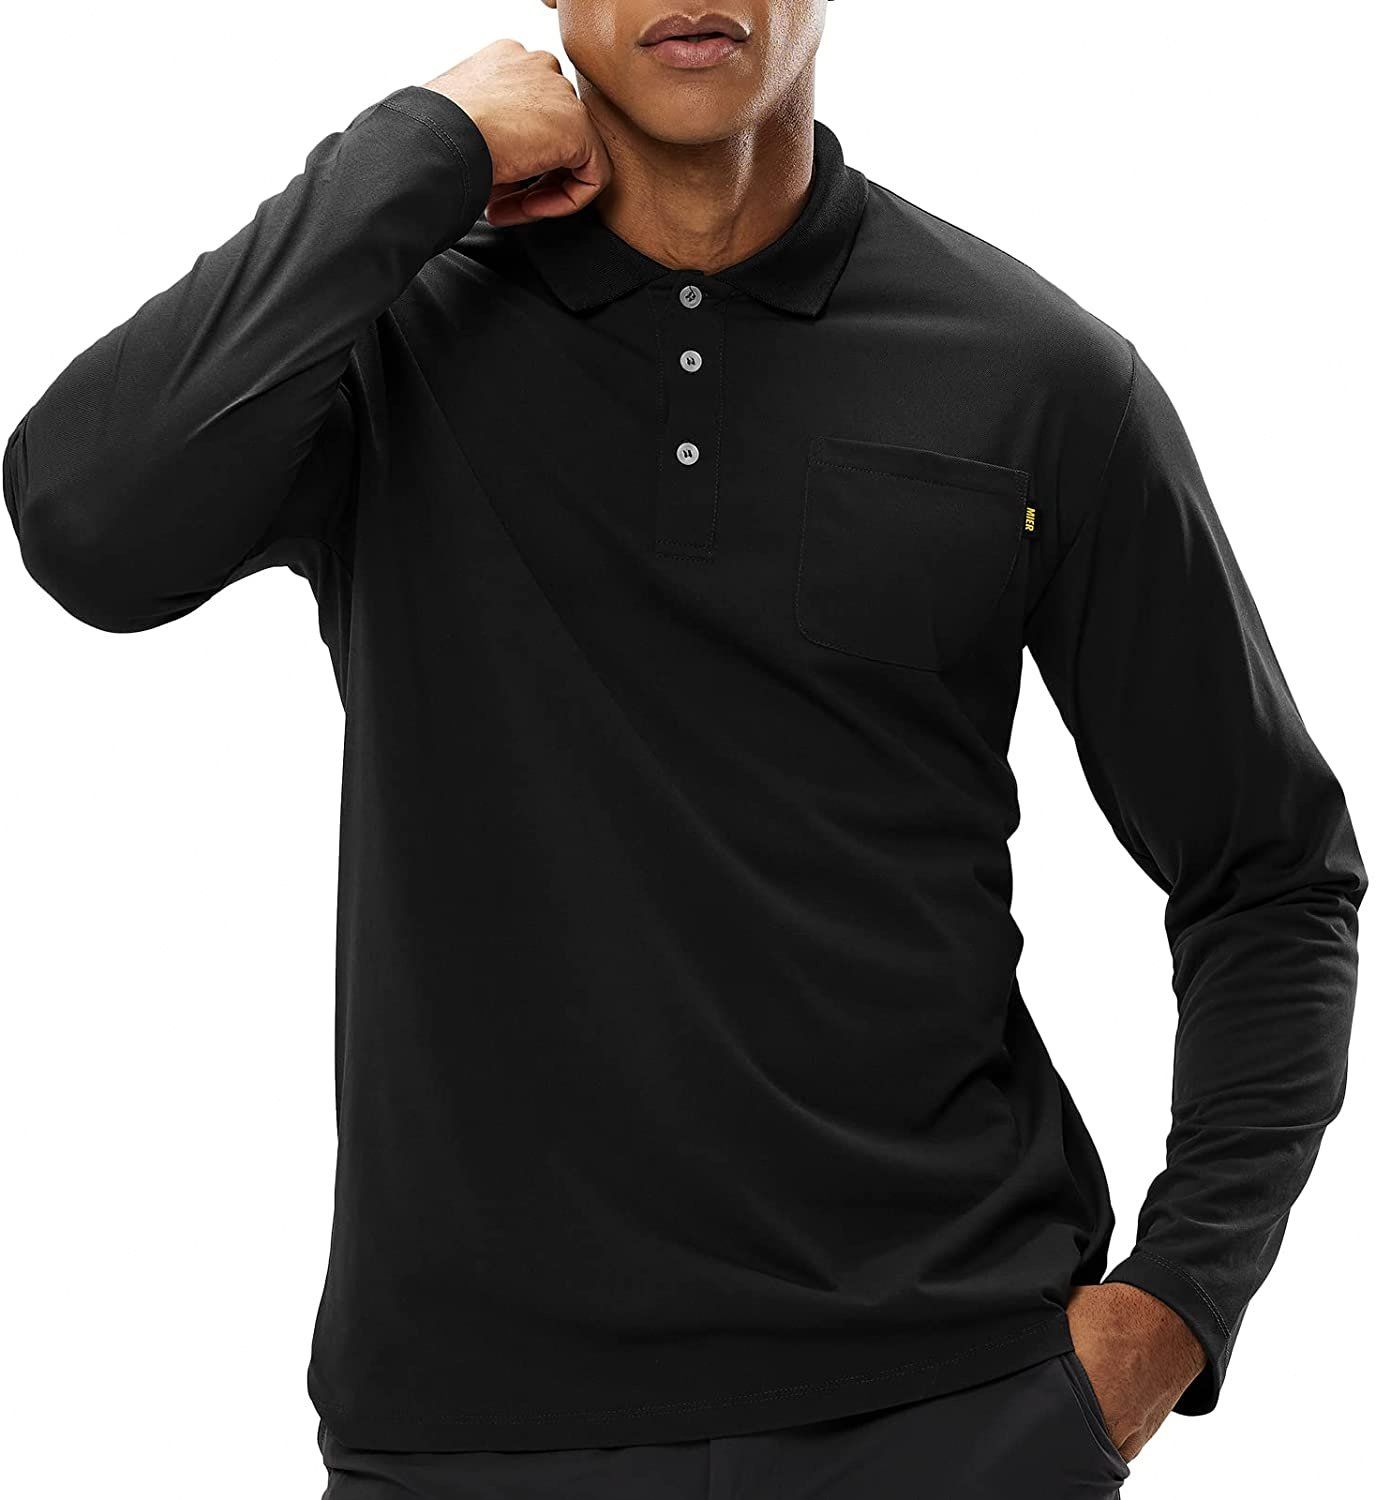 MIER Mens Long Sleeve Pocket Polo Shirt Quick Dry Collared Work 